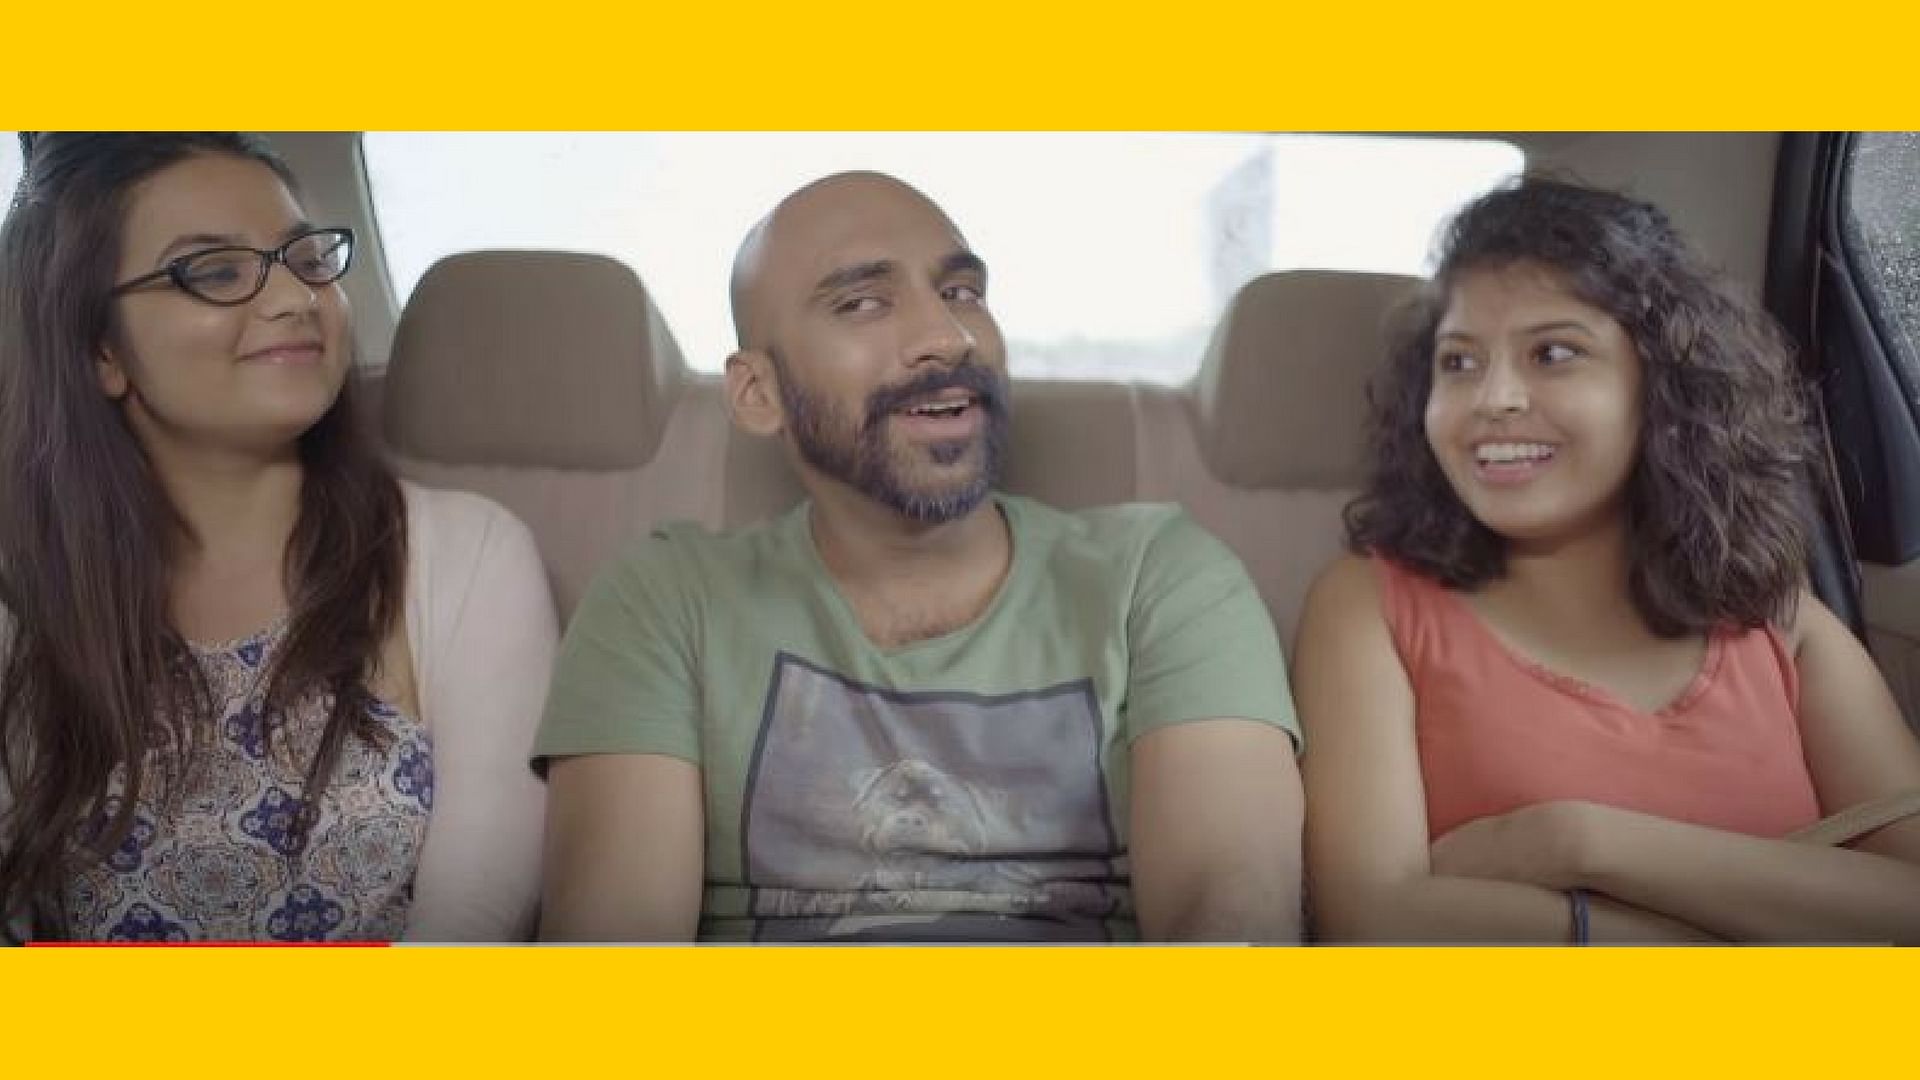 

As part of a rather quirky social experiment, Saahil Khattar went about asking millennials about what bothered them (Photo: Ola) 